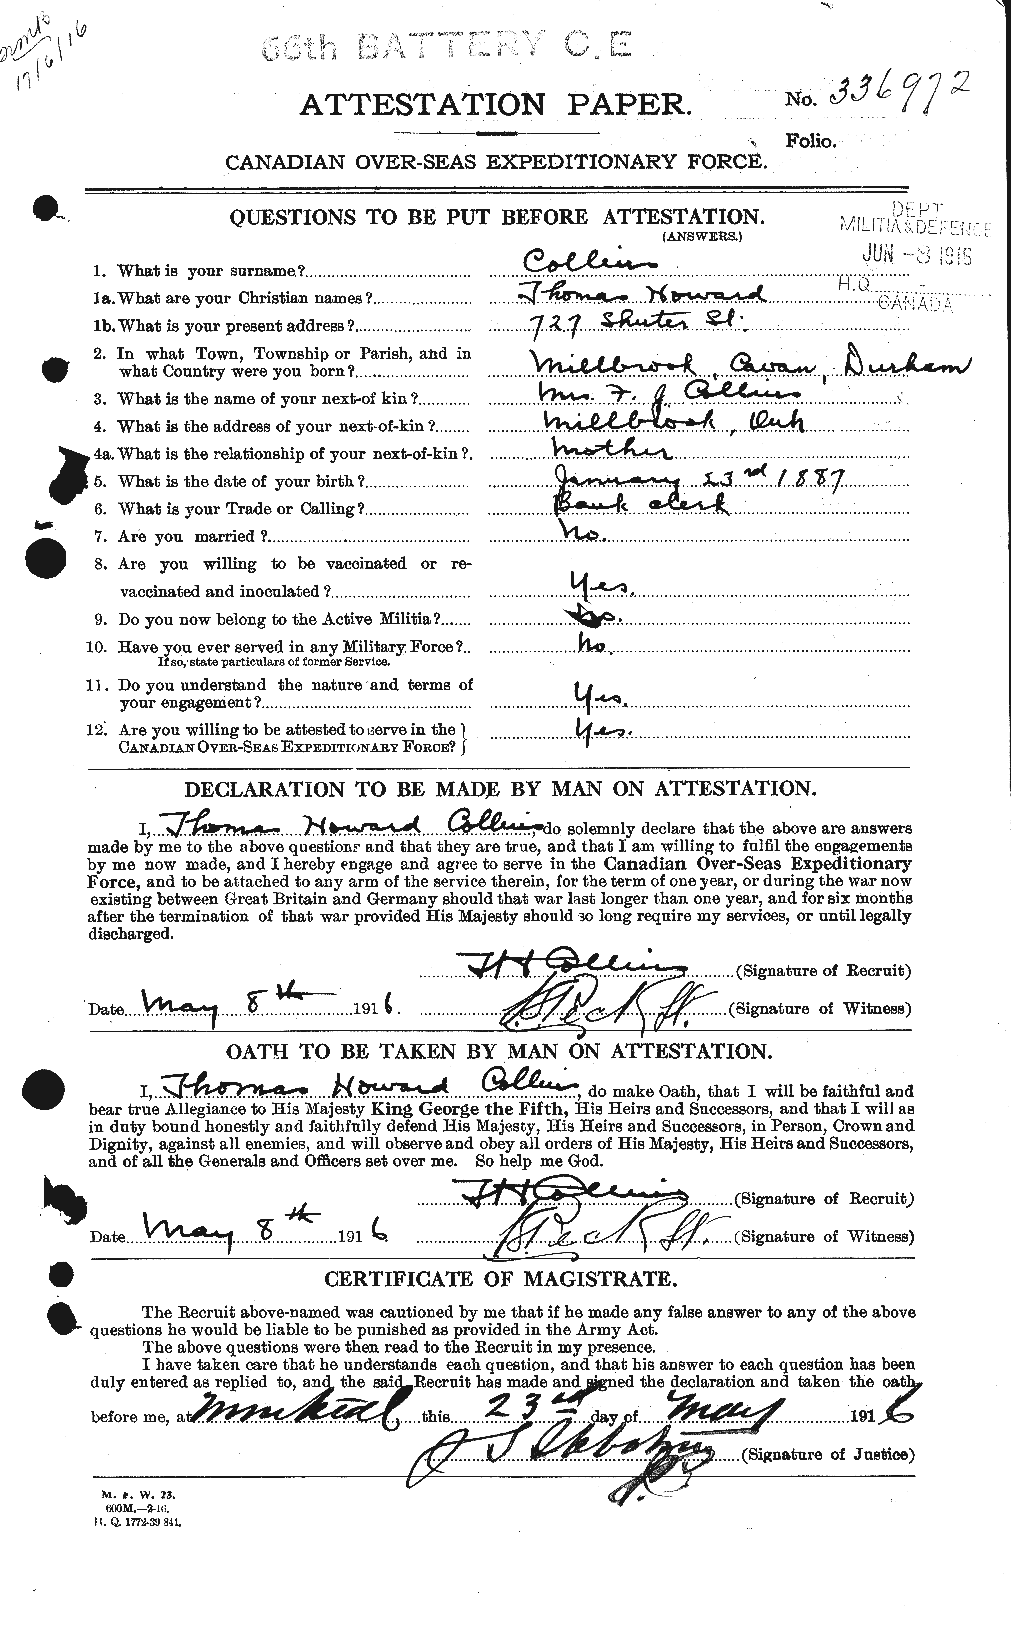 Personnel Records of the First World War - CEF 069126a